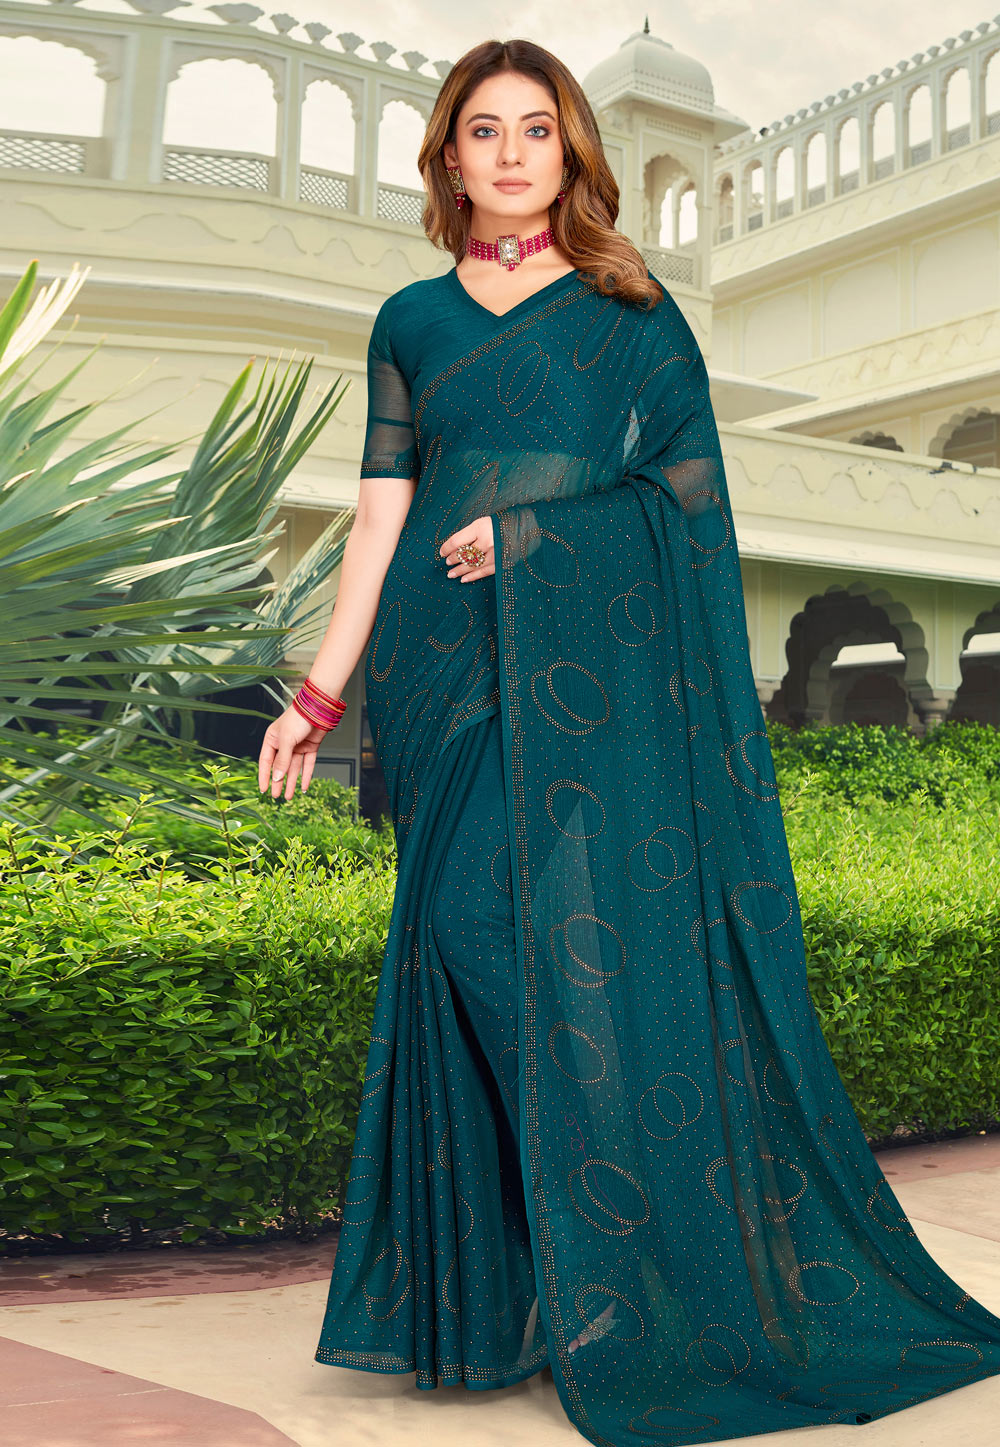 Teal Shimmer Chiffon Saree With Blouse 250317